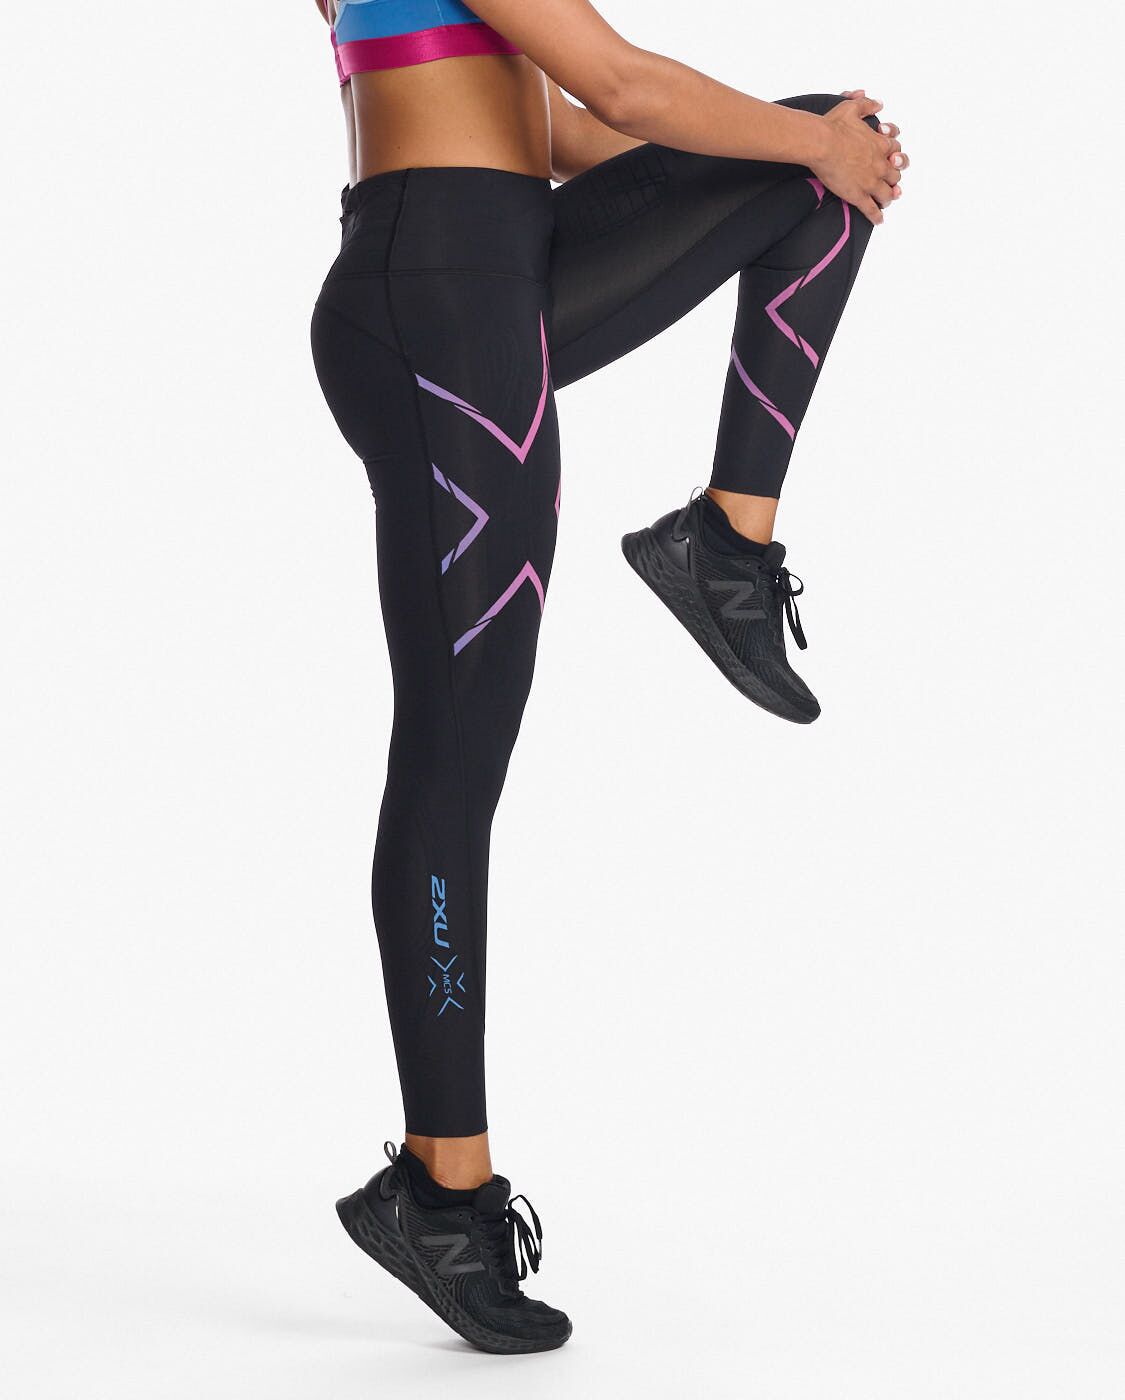 2XU South Africa - Women's Light Speed Mid-Rise Compression Tights - Black/Festival Ombre Reflect